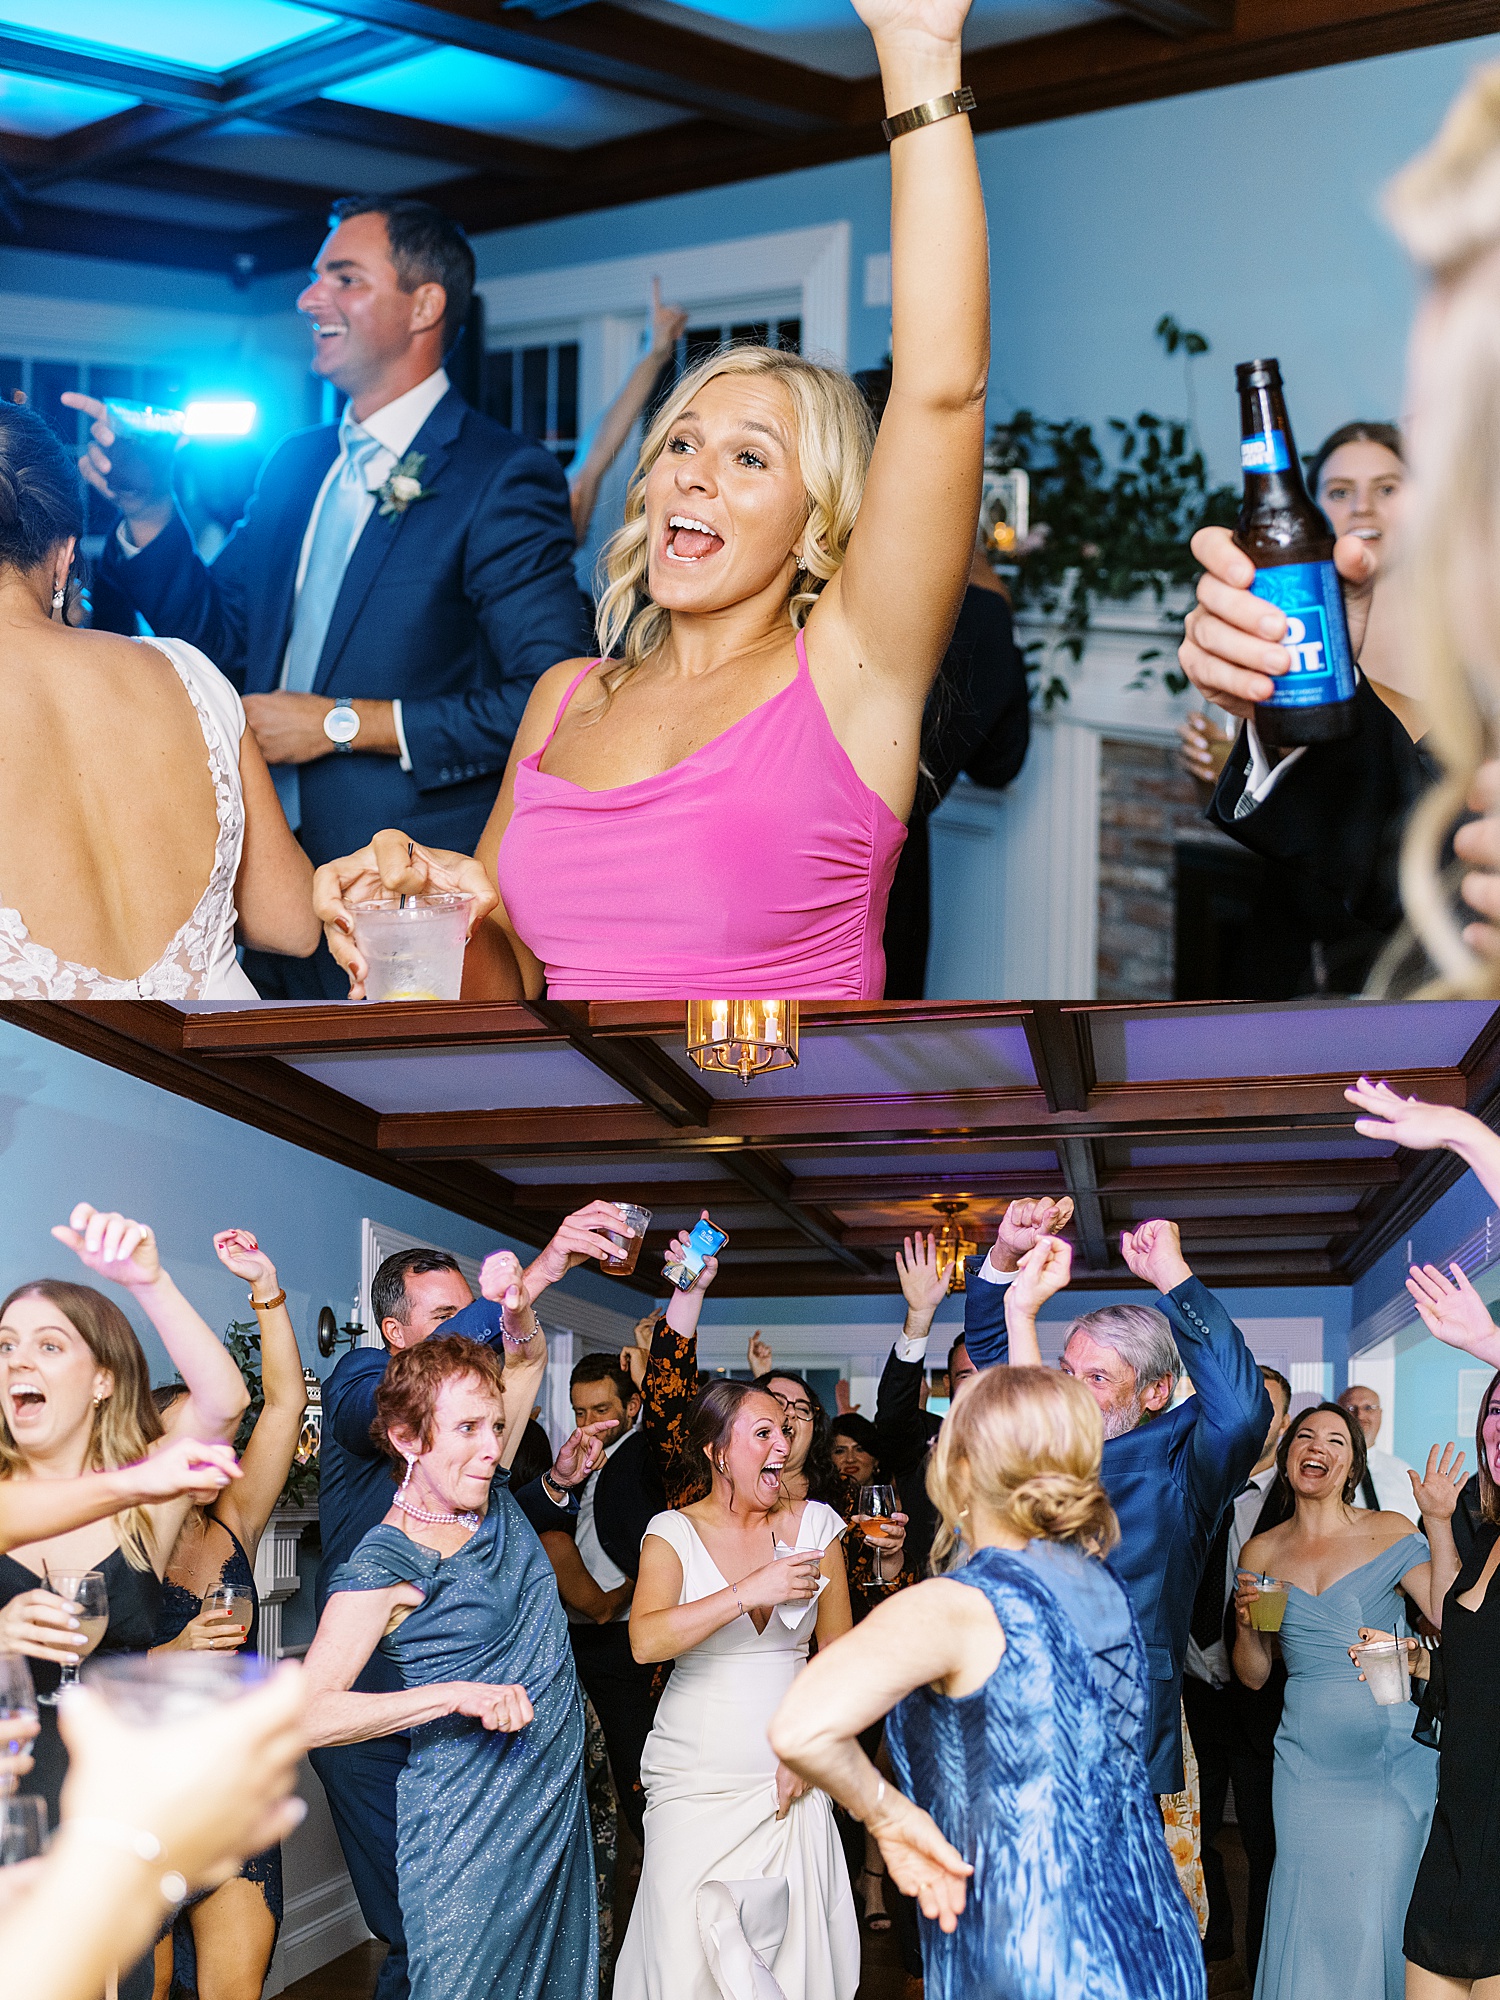 Guests dancing at a reception by Cape Cod wedding photographer Lynne Reznick